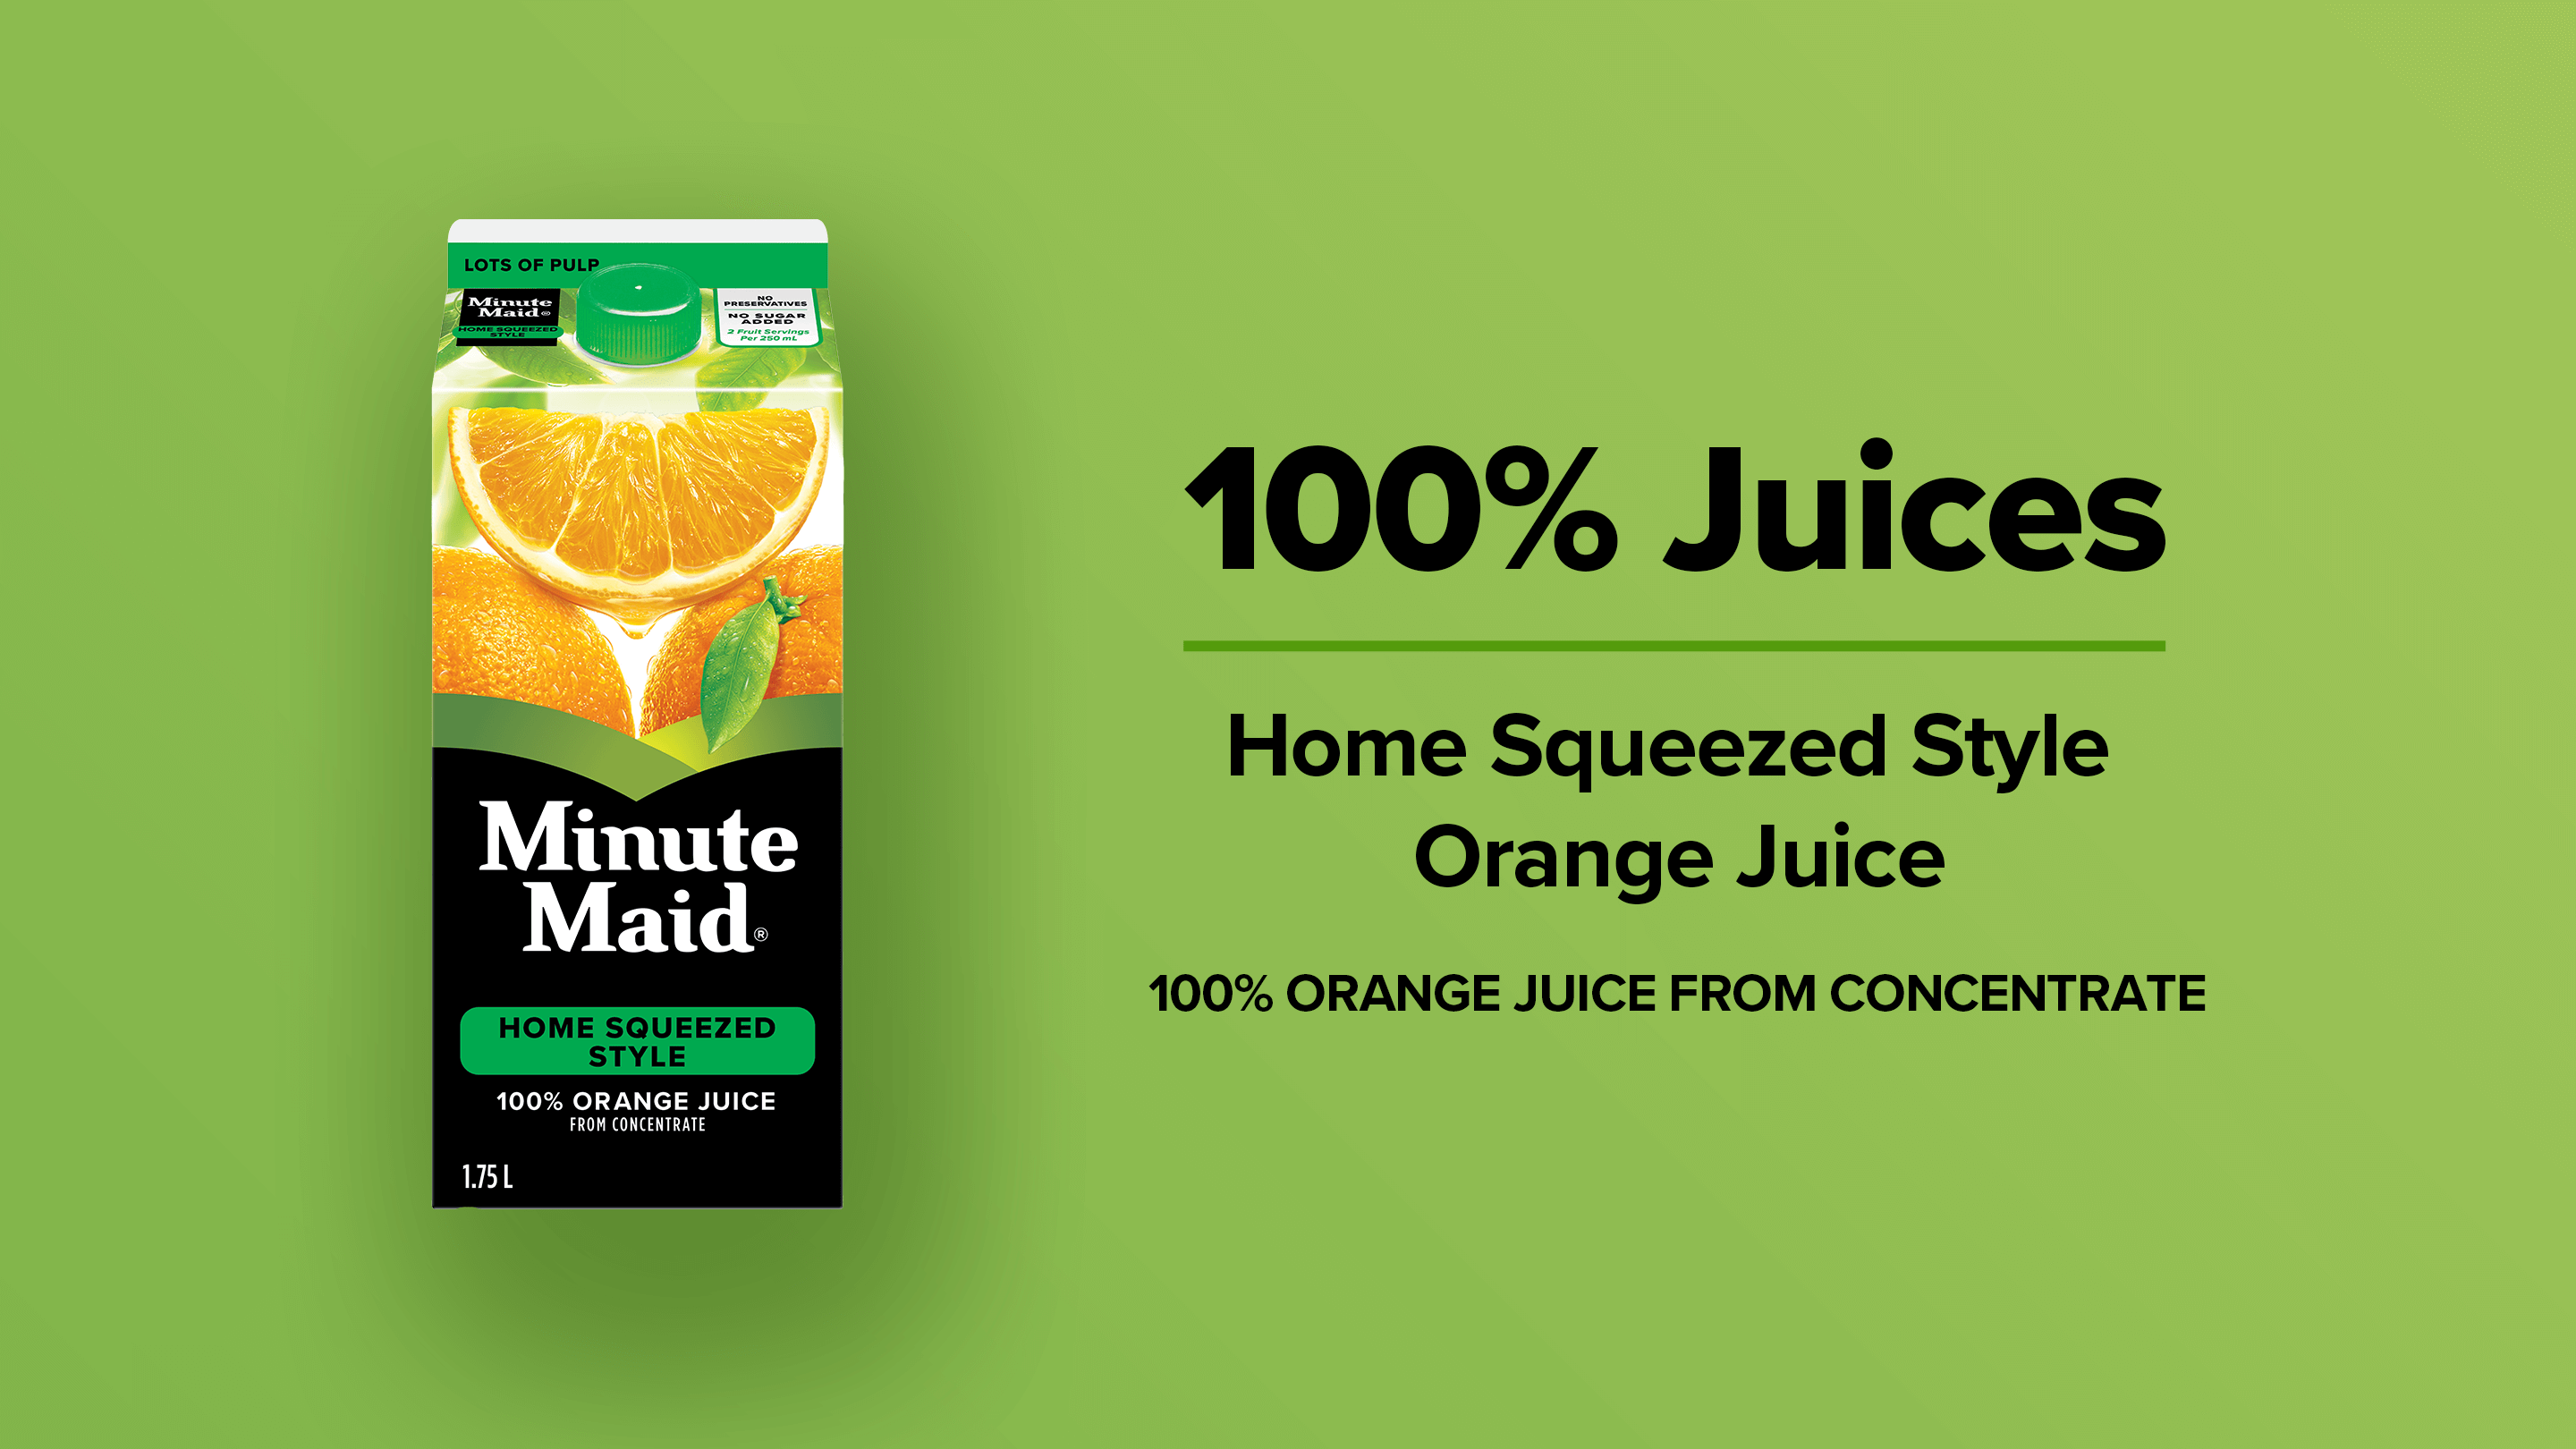 Minute Maid 100% Juices. Home Squeezed Style Orange Juice. 100% Orange Juice from Concentrate.